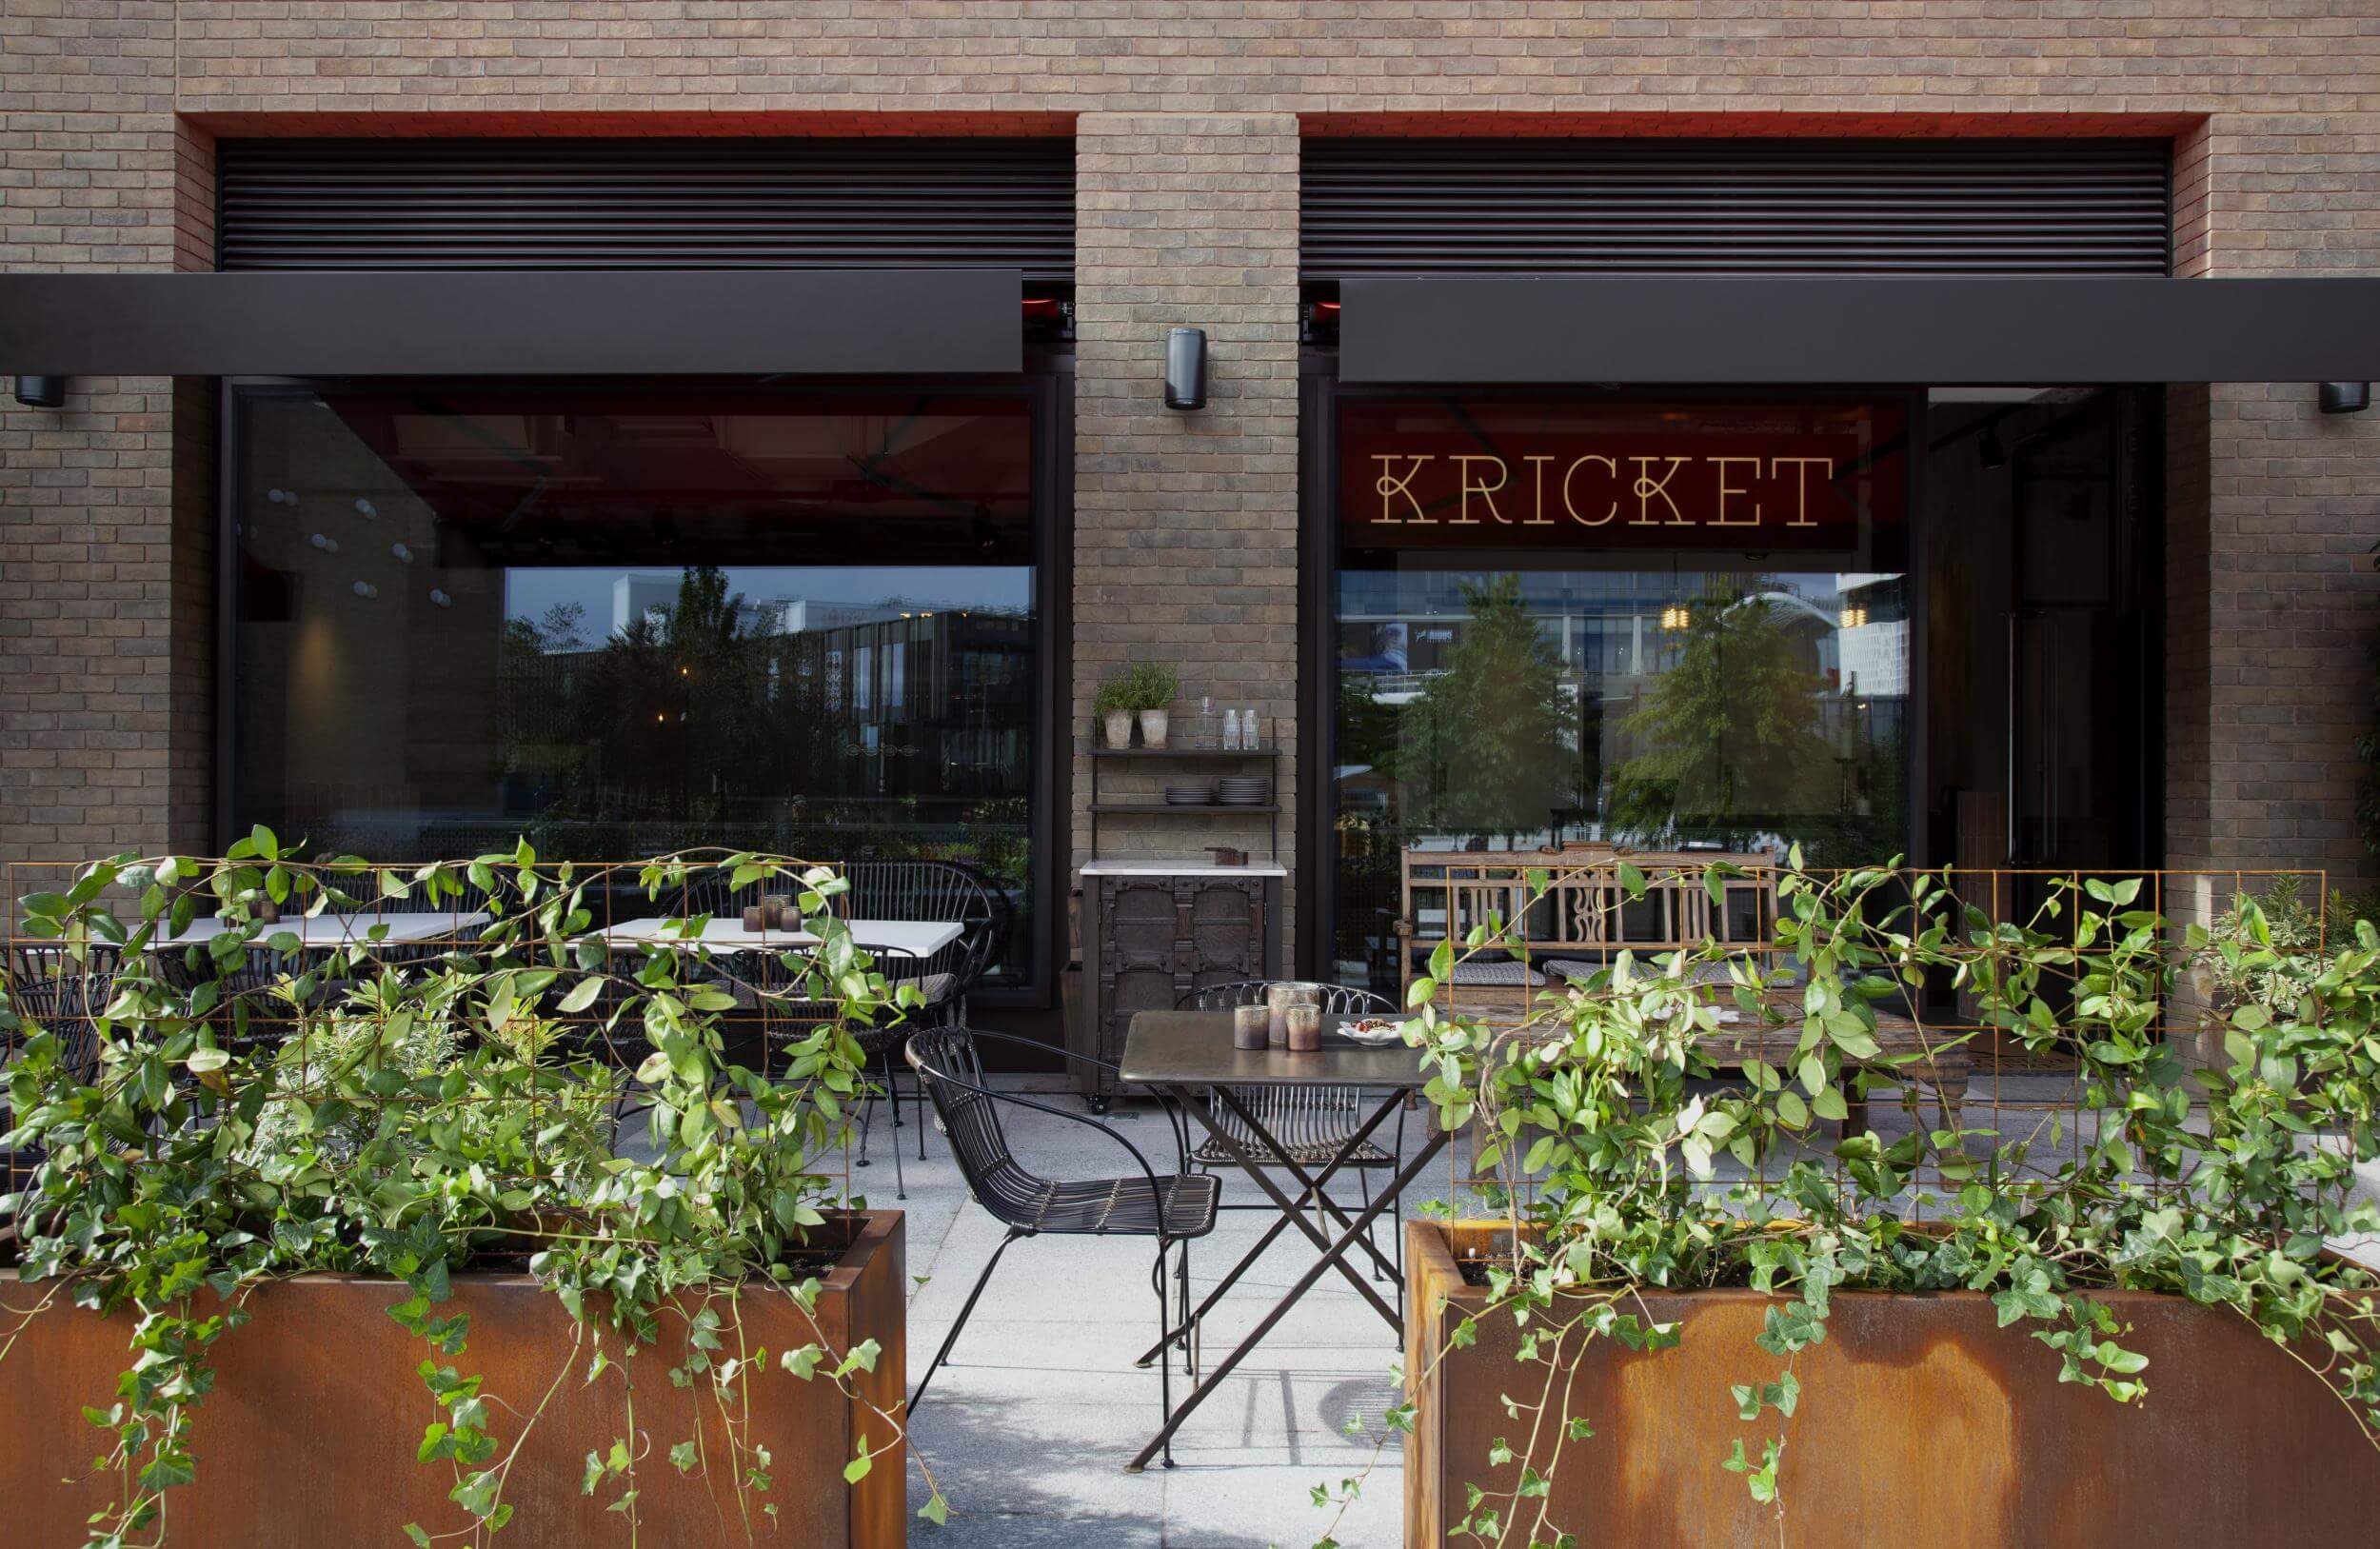  Kricket Reimagines The Classic British Curry House In London U.K. 